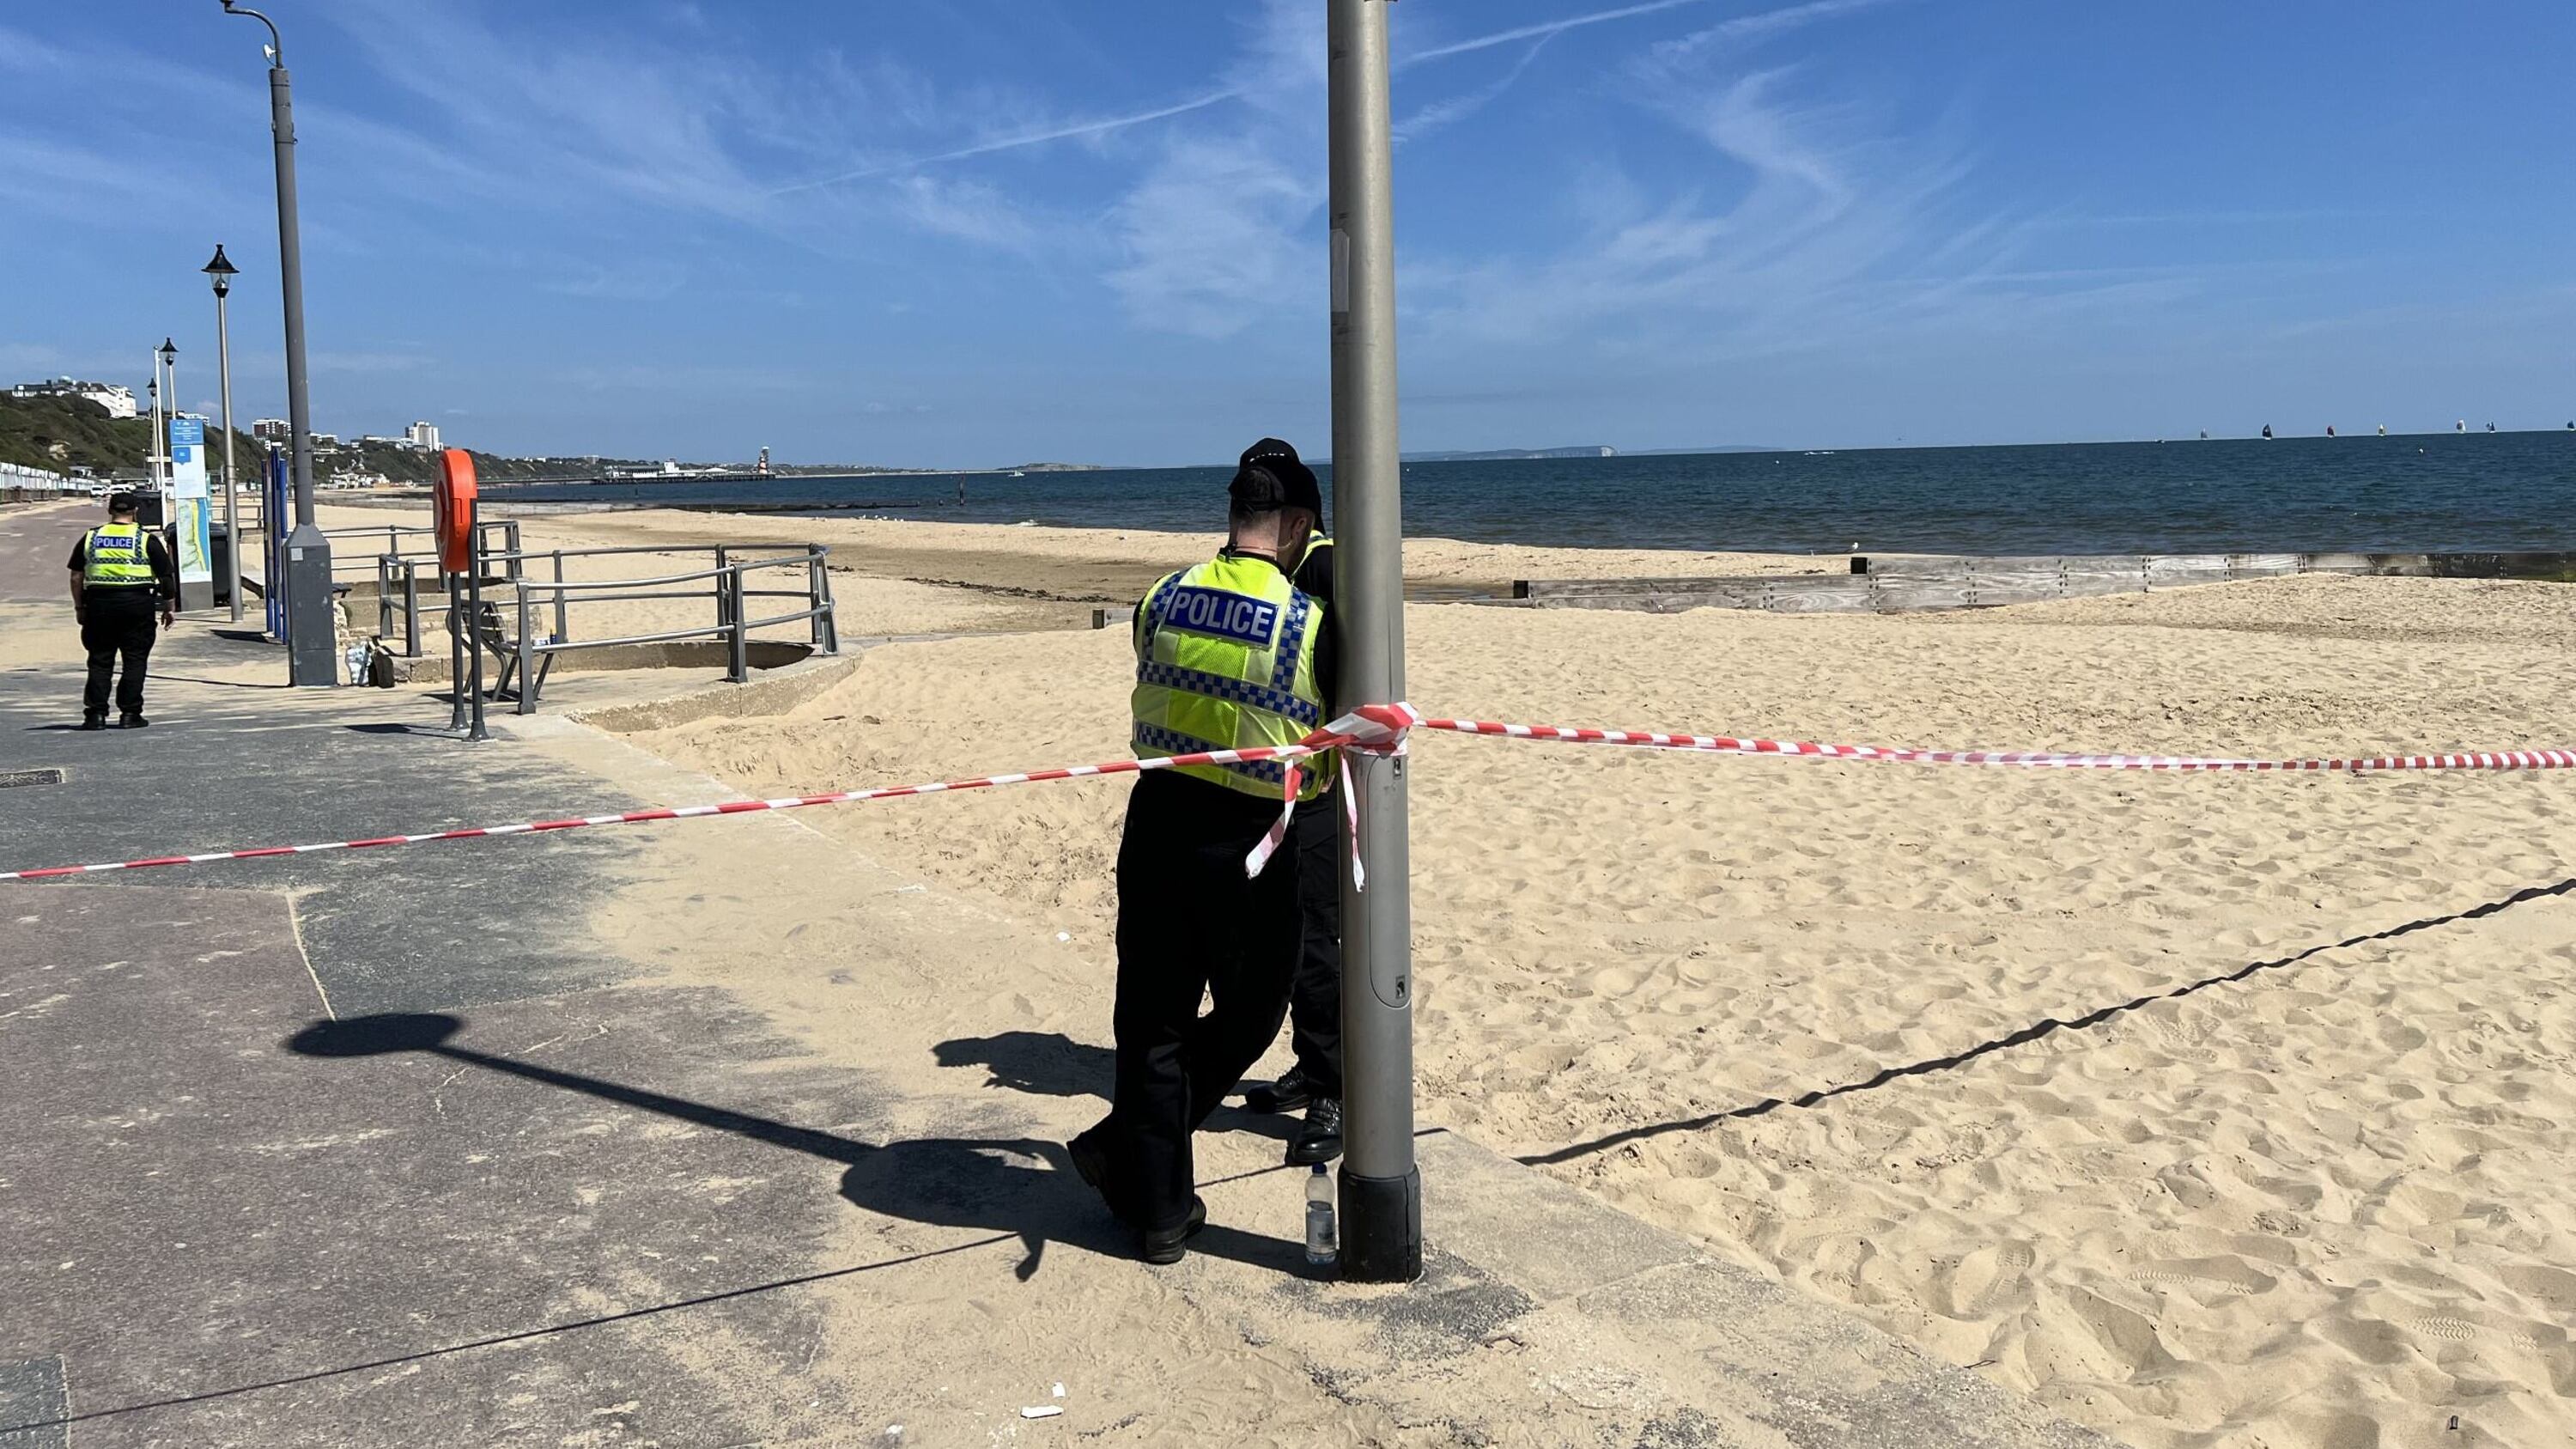 Police officers at the scene of the incident at Durley Chine Beach in Bournemouth